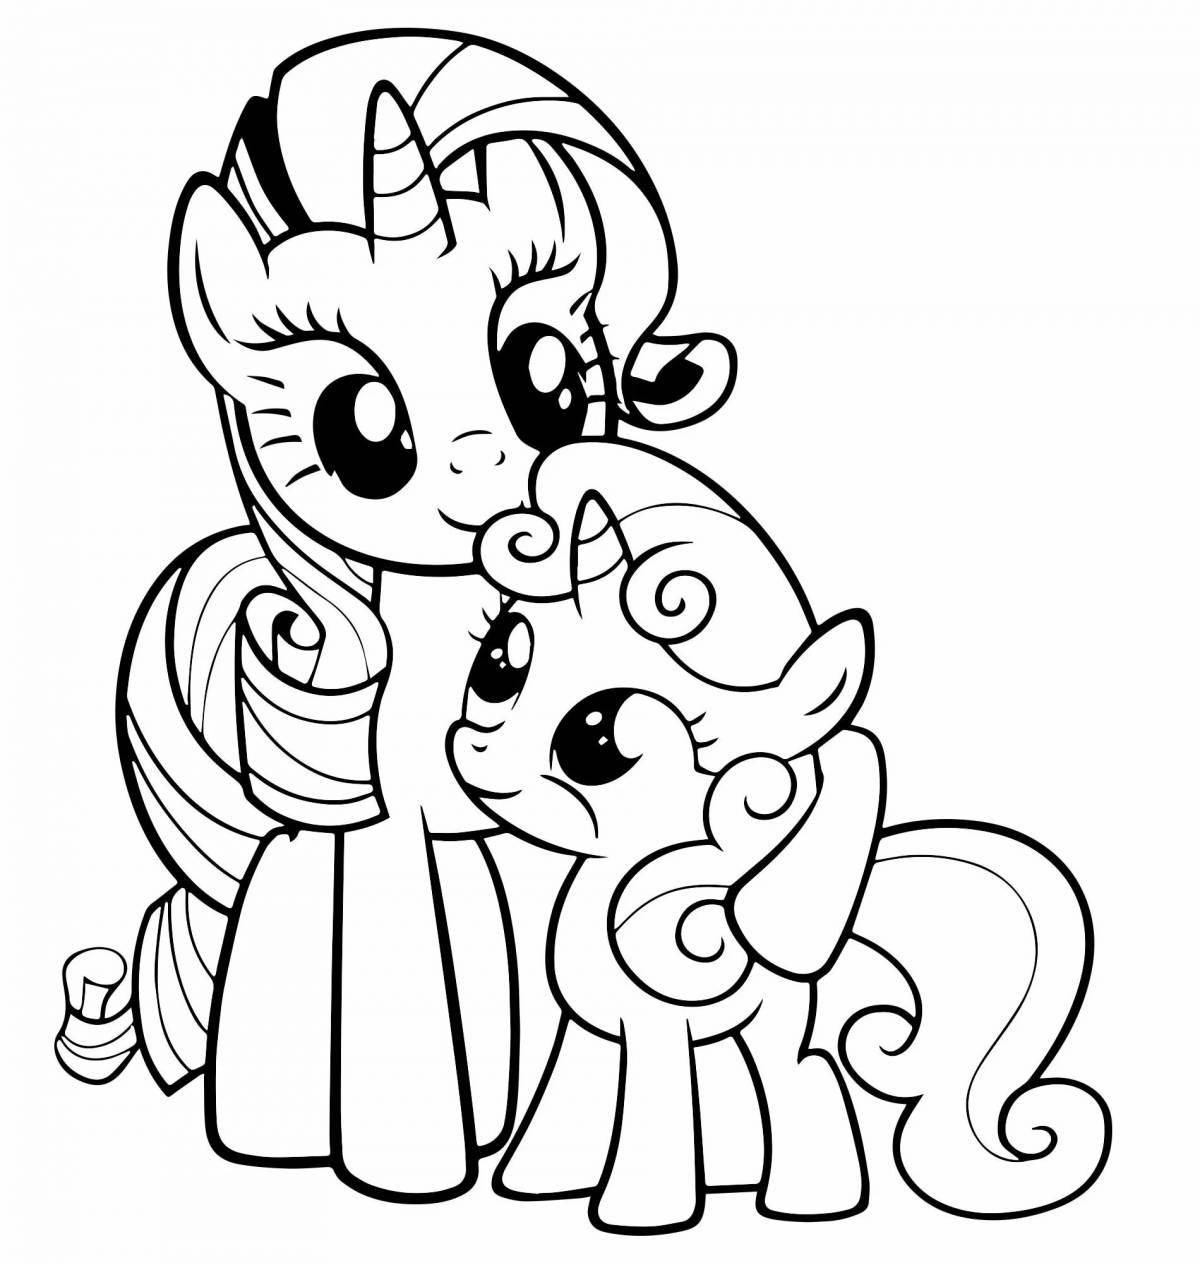 Glamor pony coloring page